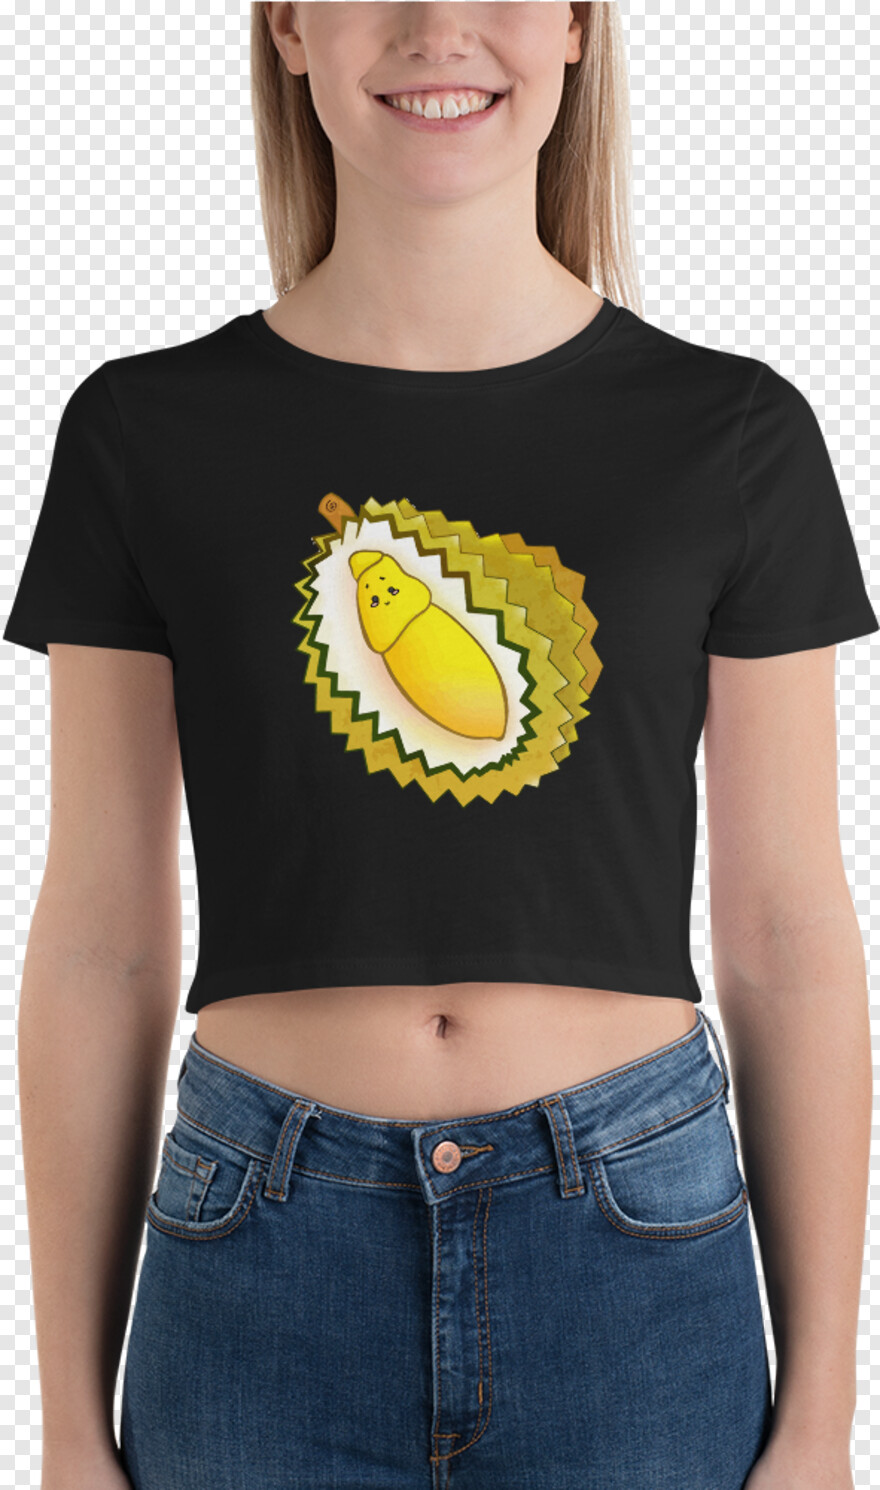 durian # 943217